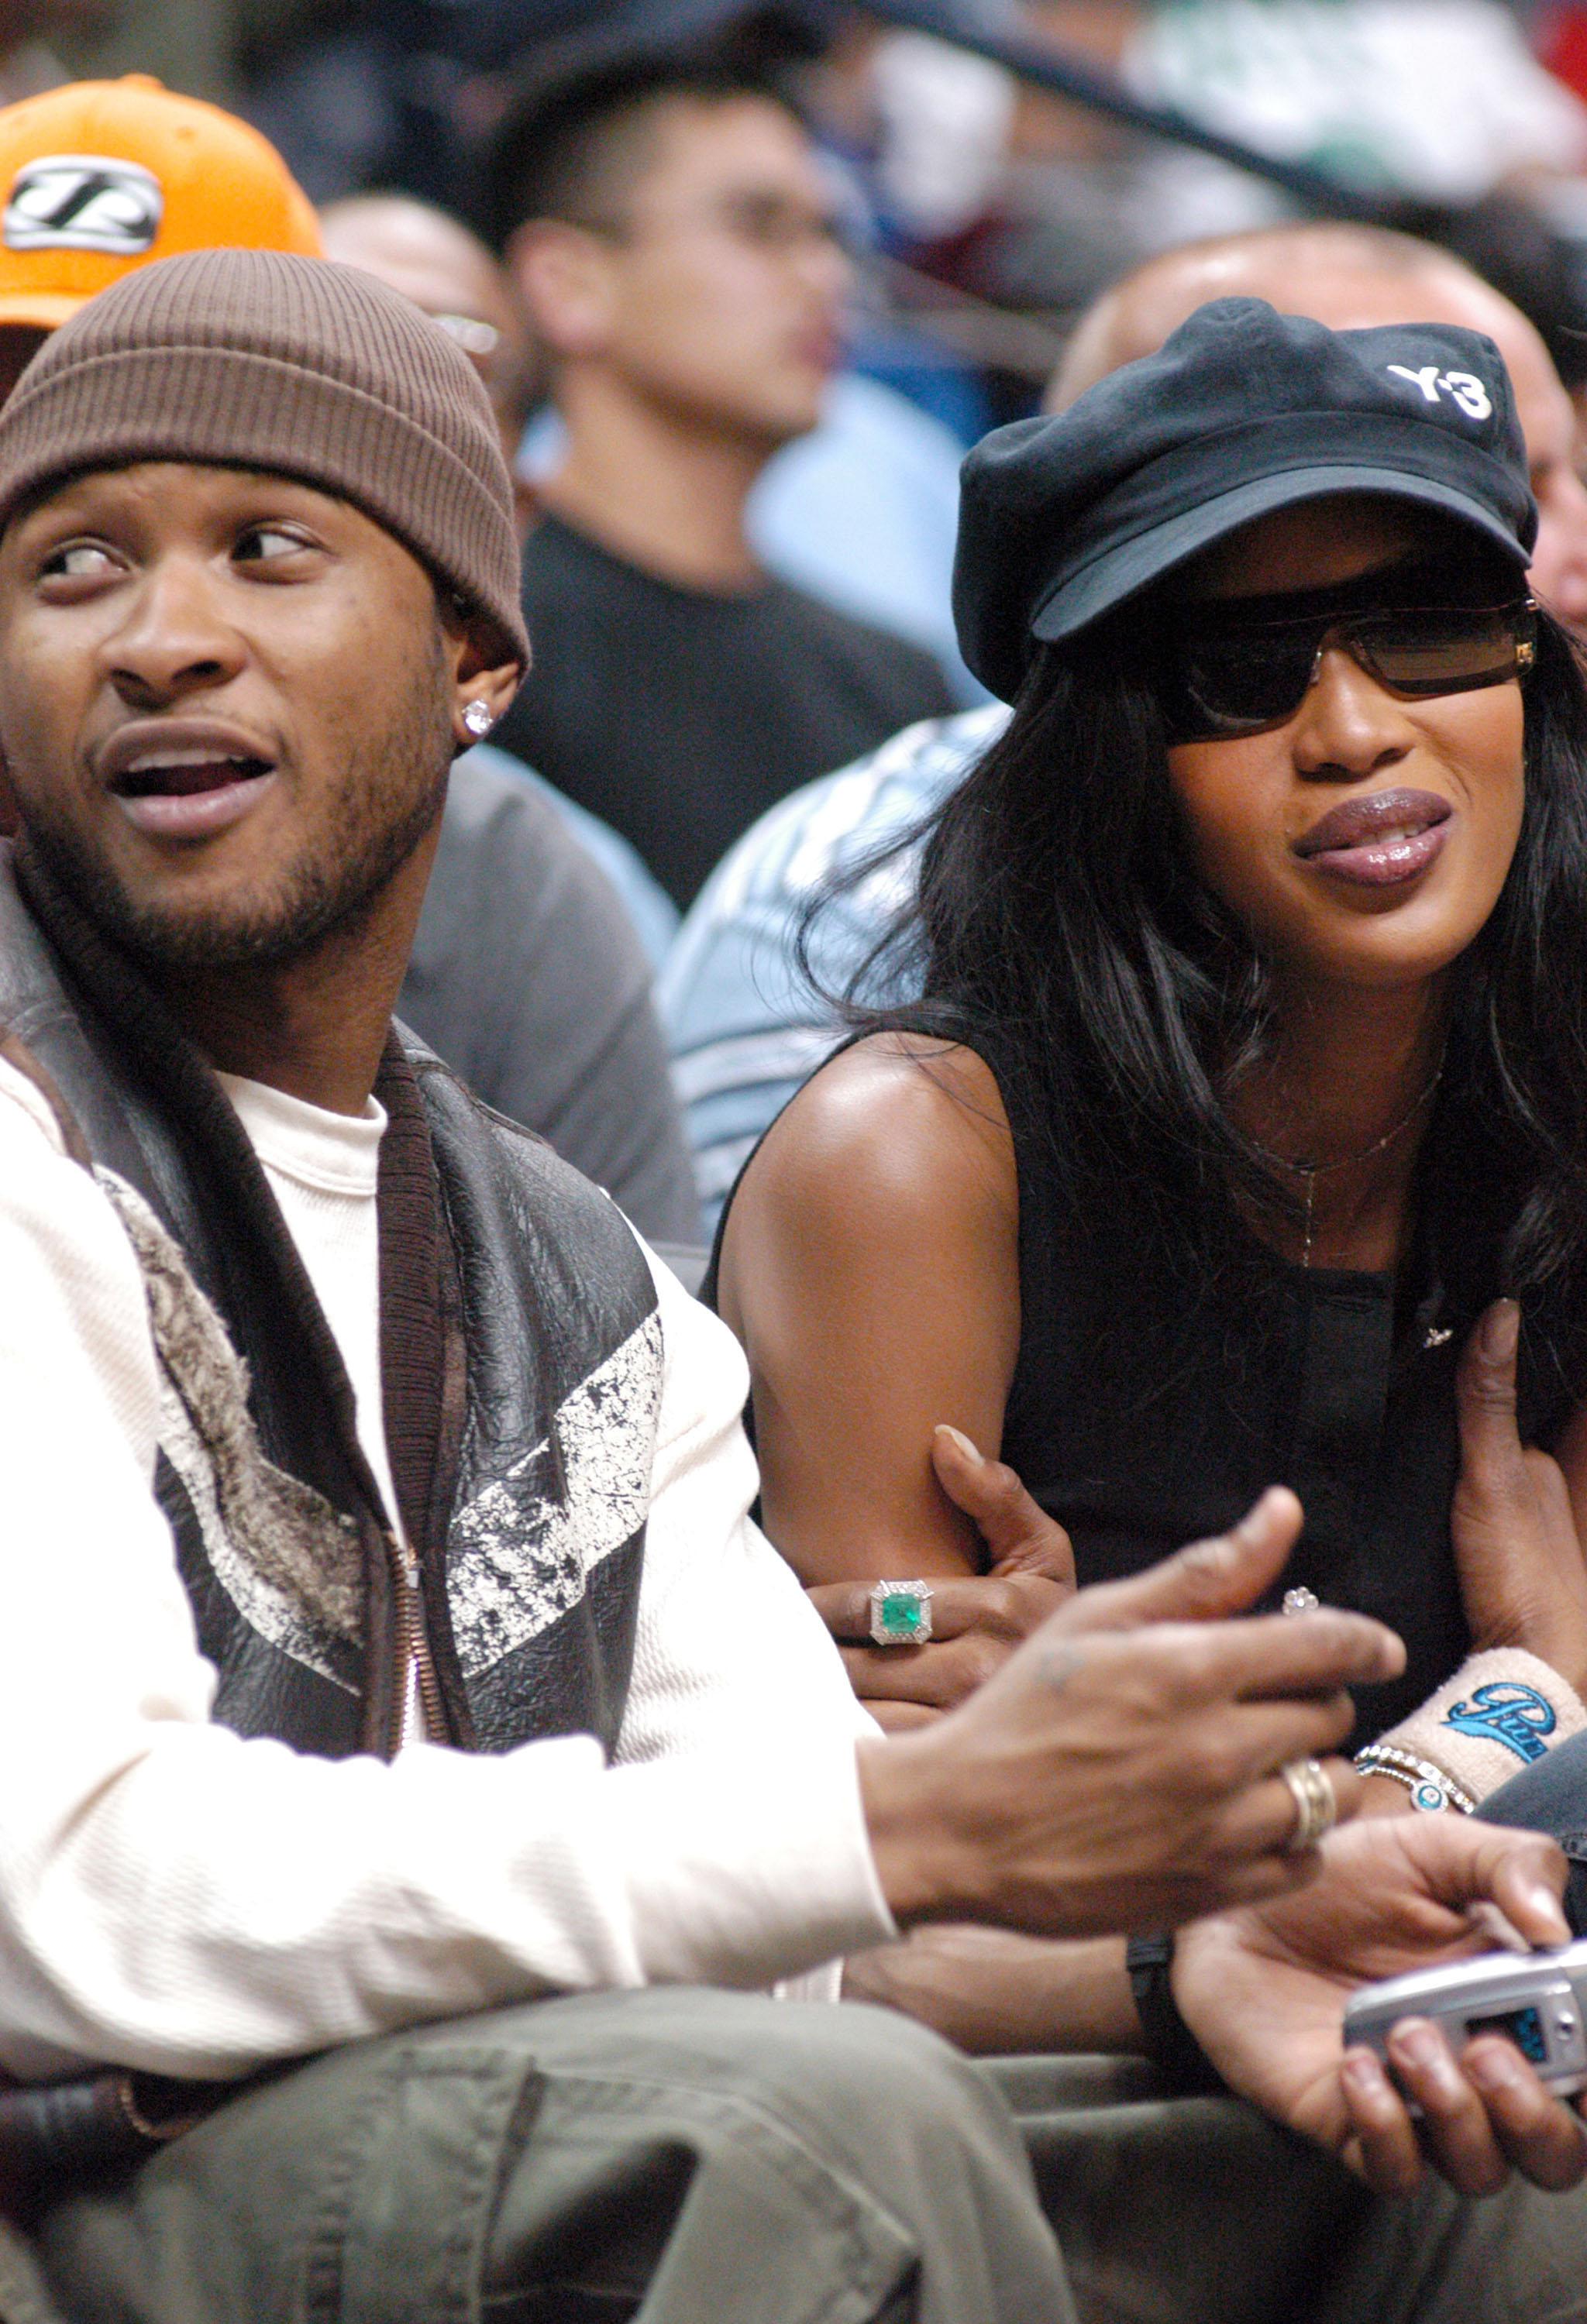 Usher wearing a graphic shirt and beanie, and Naomi in a black cap and sleeveless top, sitting at a sporting event